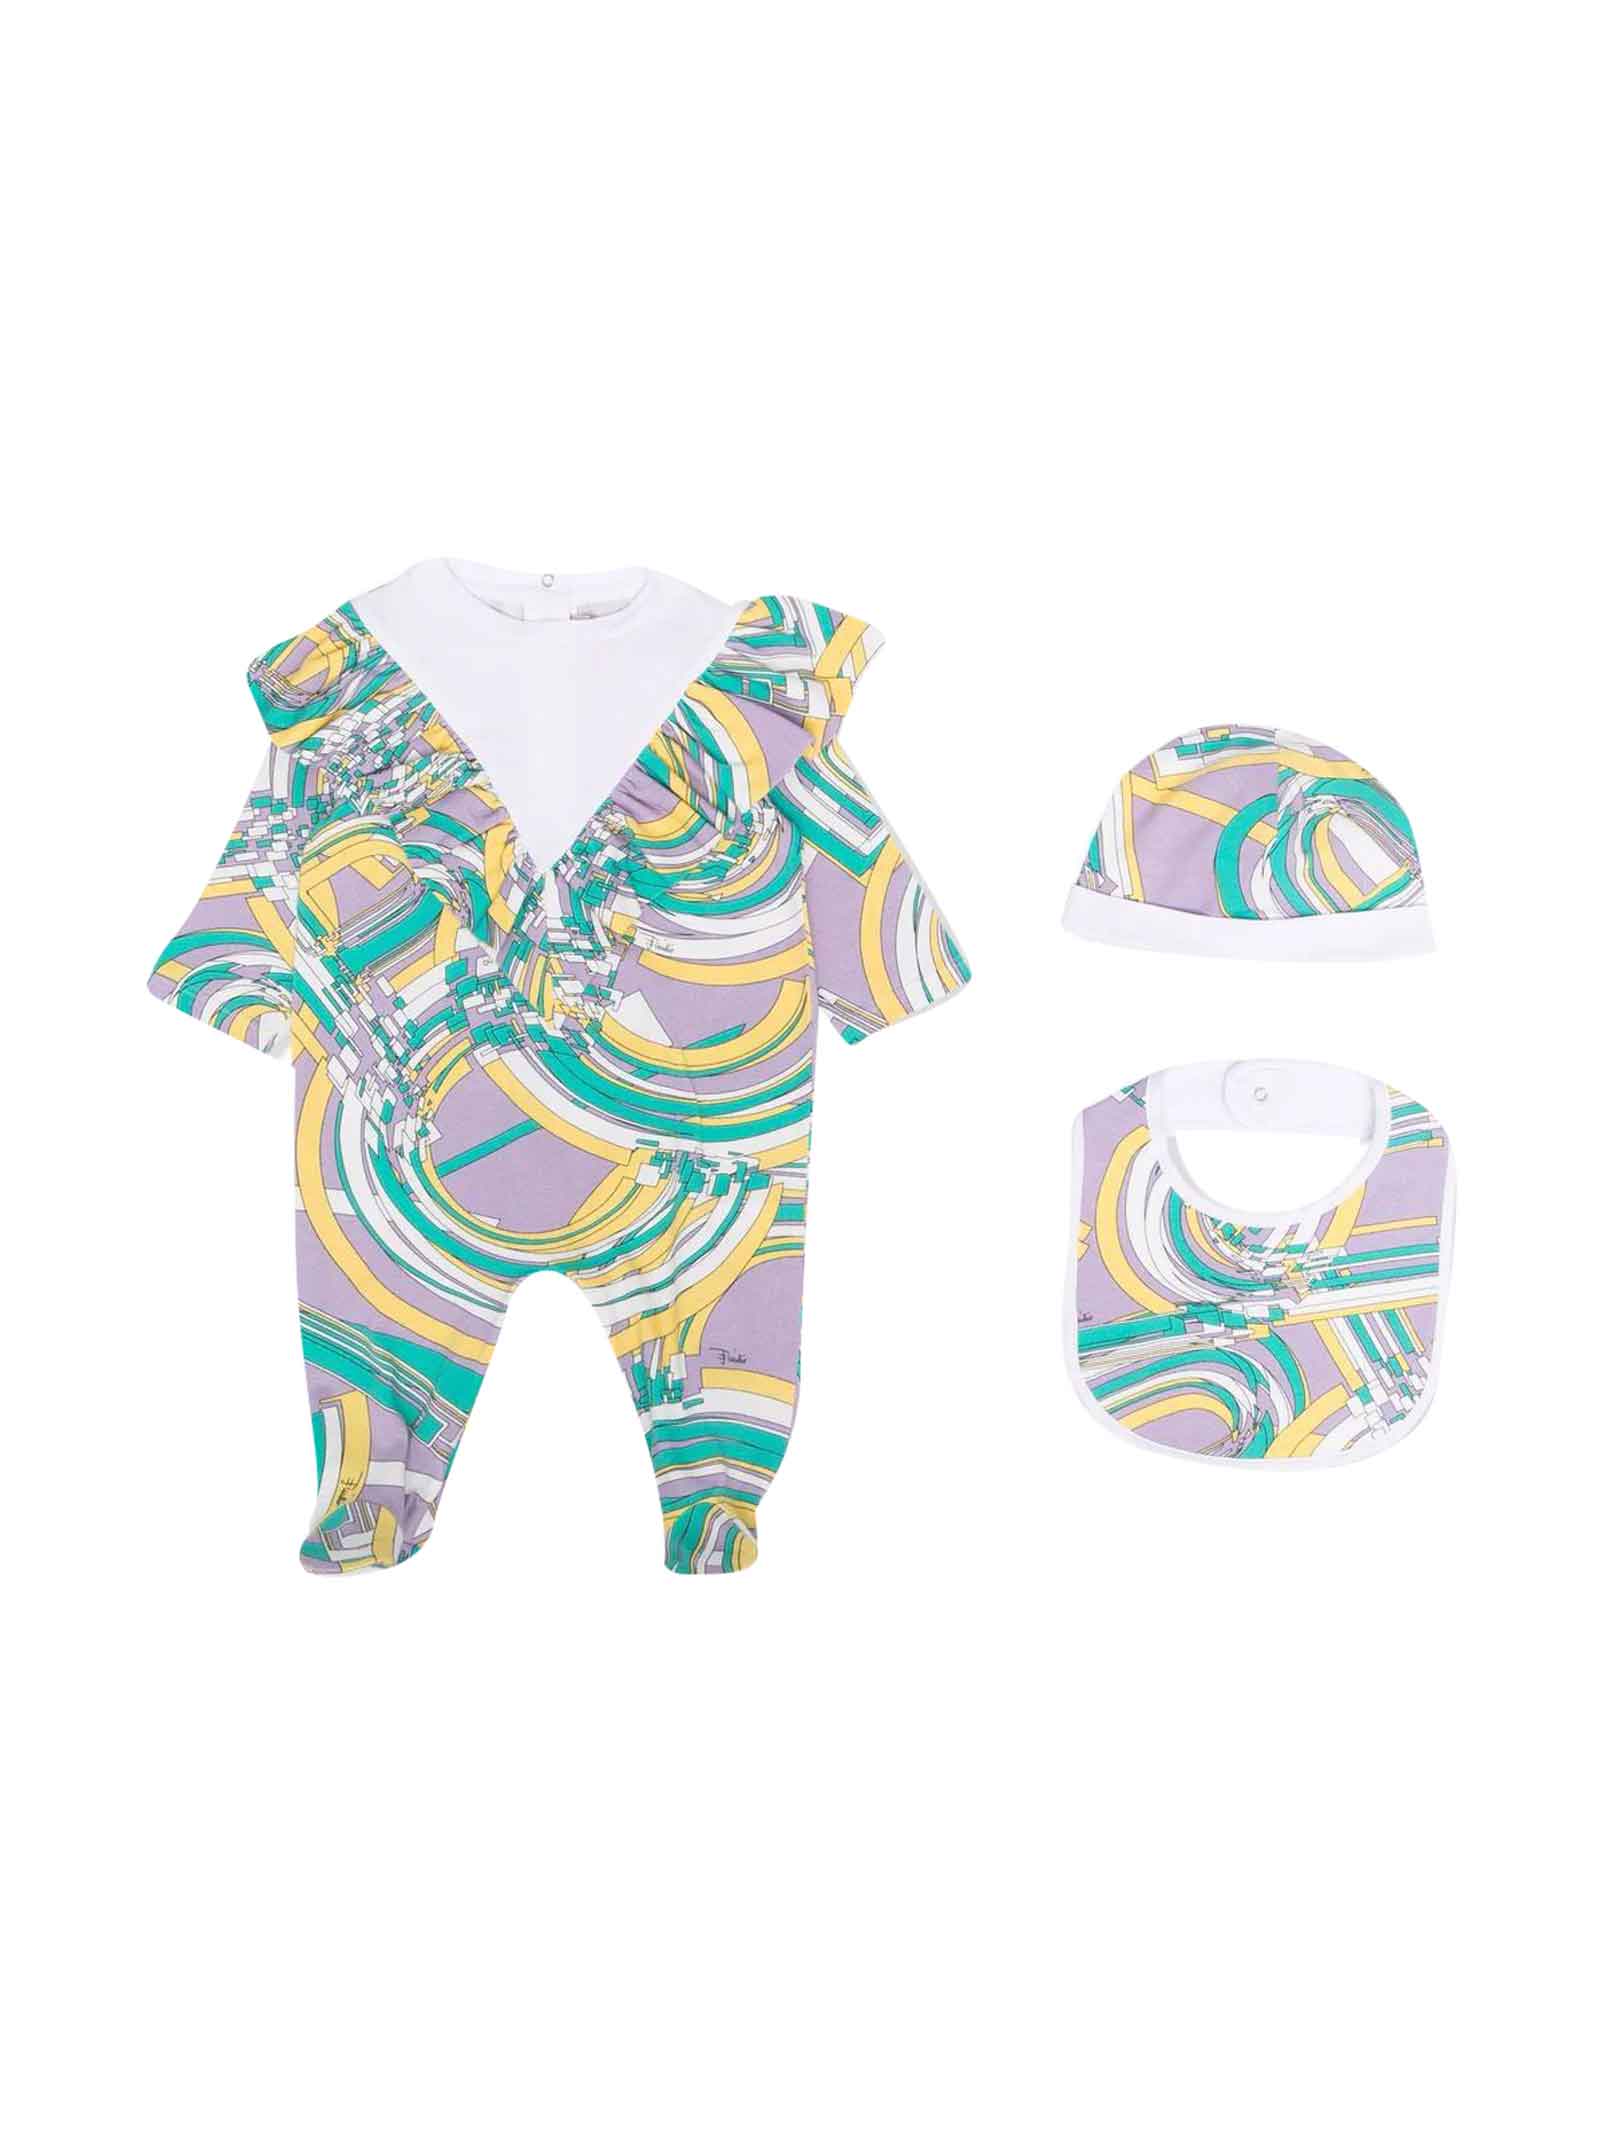 EMILIO PUCCI MULTICOLOUR COTTON BLEND ABSTRACT-PRINT BABY GIRL BODY FROM FEATURING ABSTRACT PATTERN PRINT, PANELL